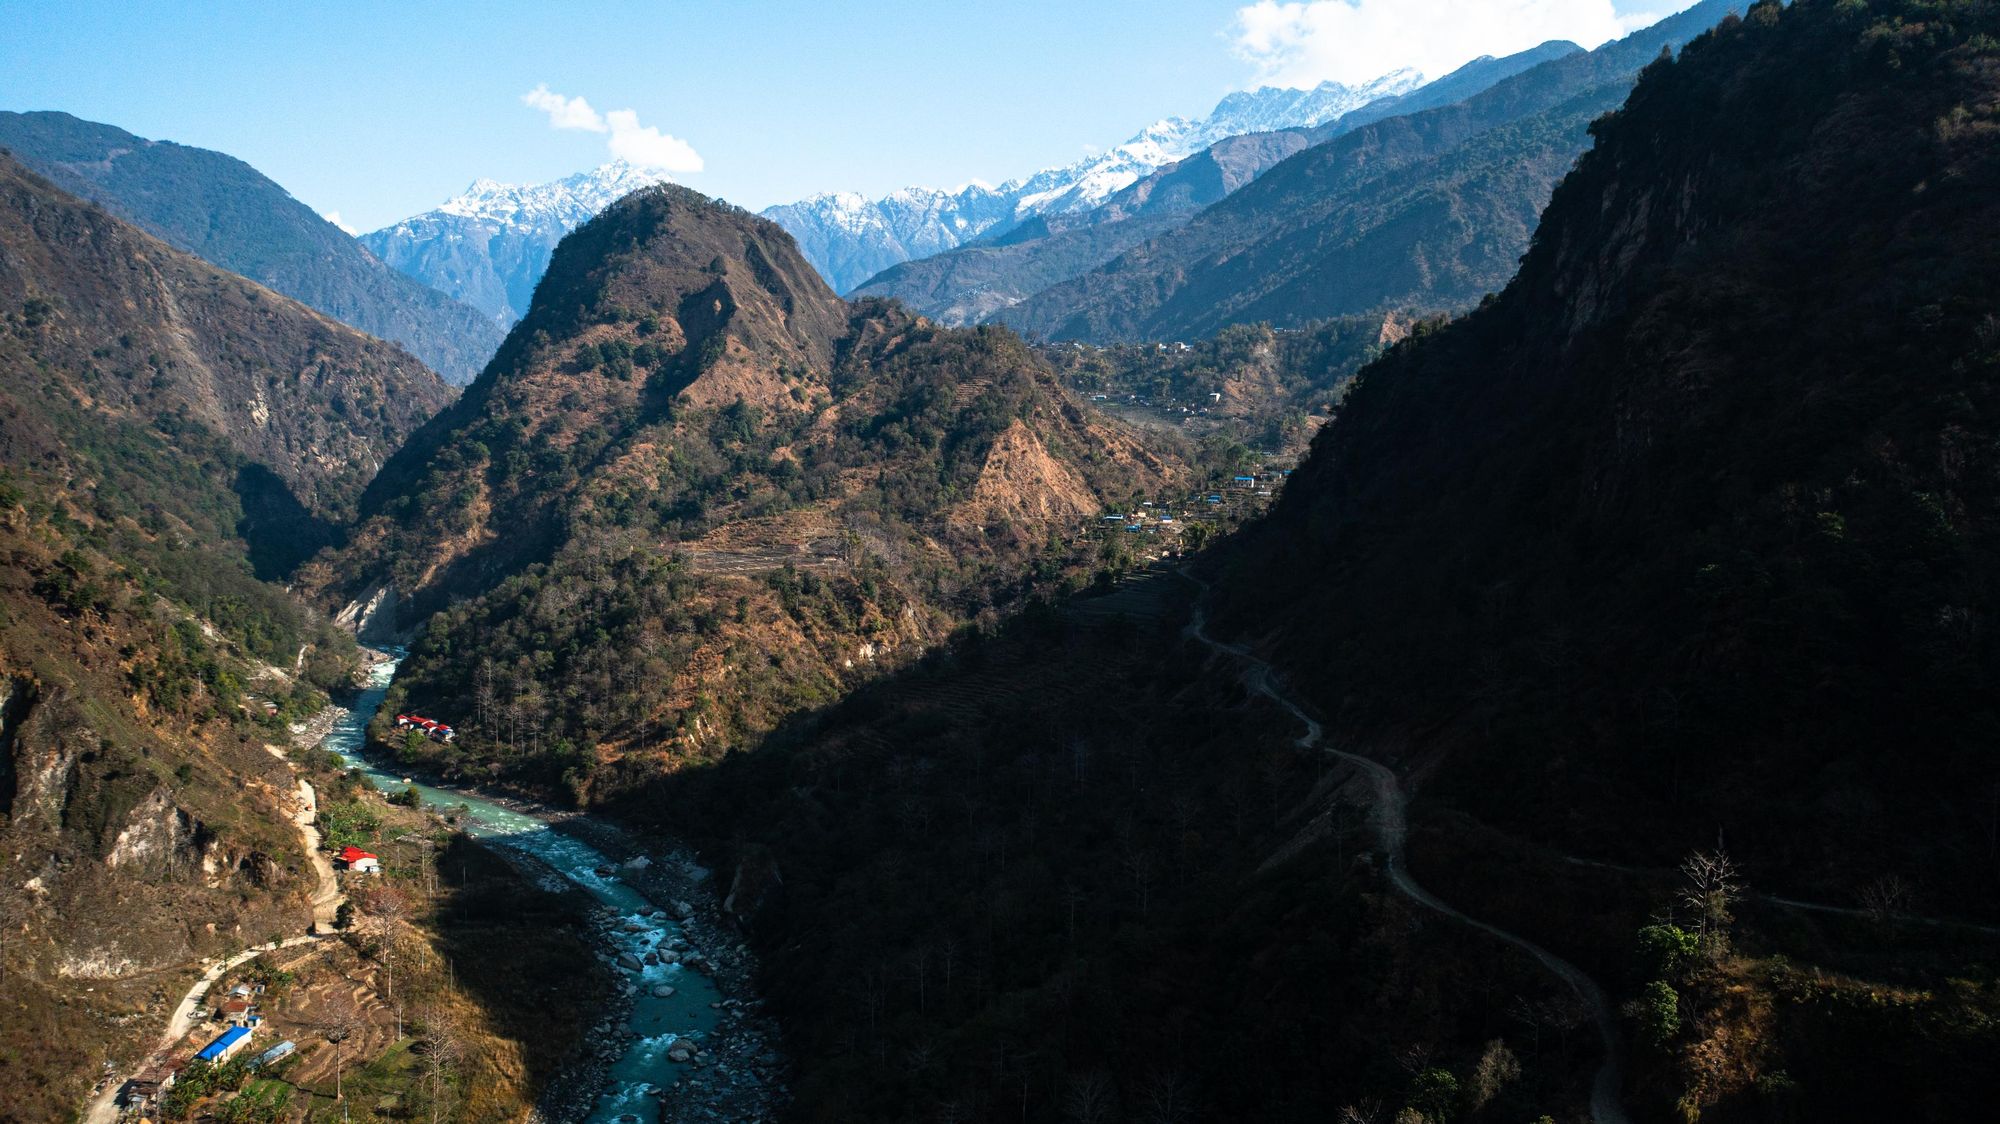 An early view on the Annapurna Circuit, before entering the big mountains. Photo: Josh Edwards